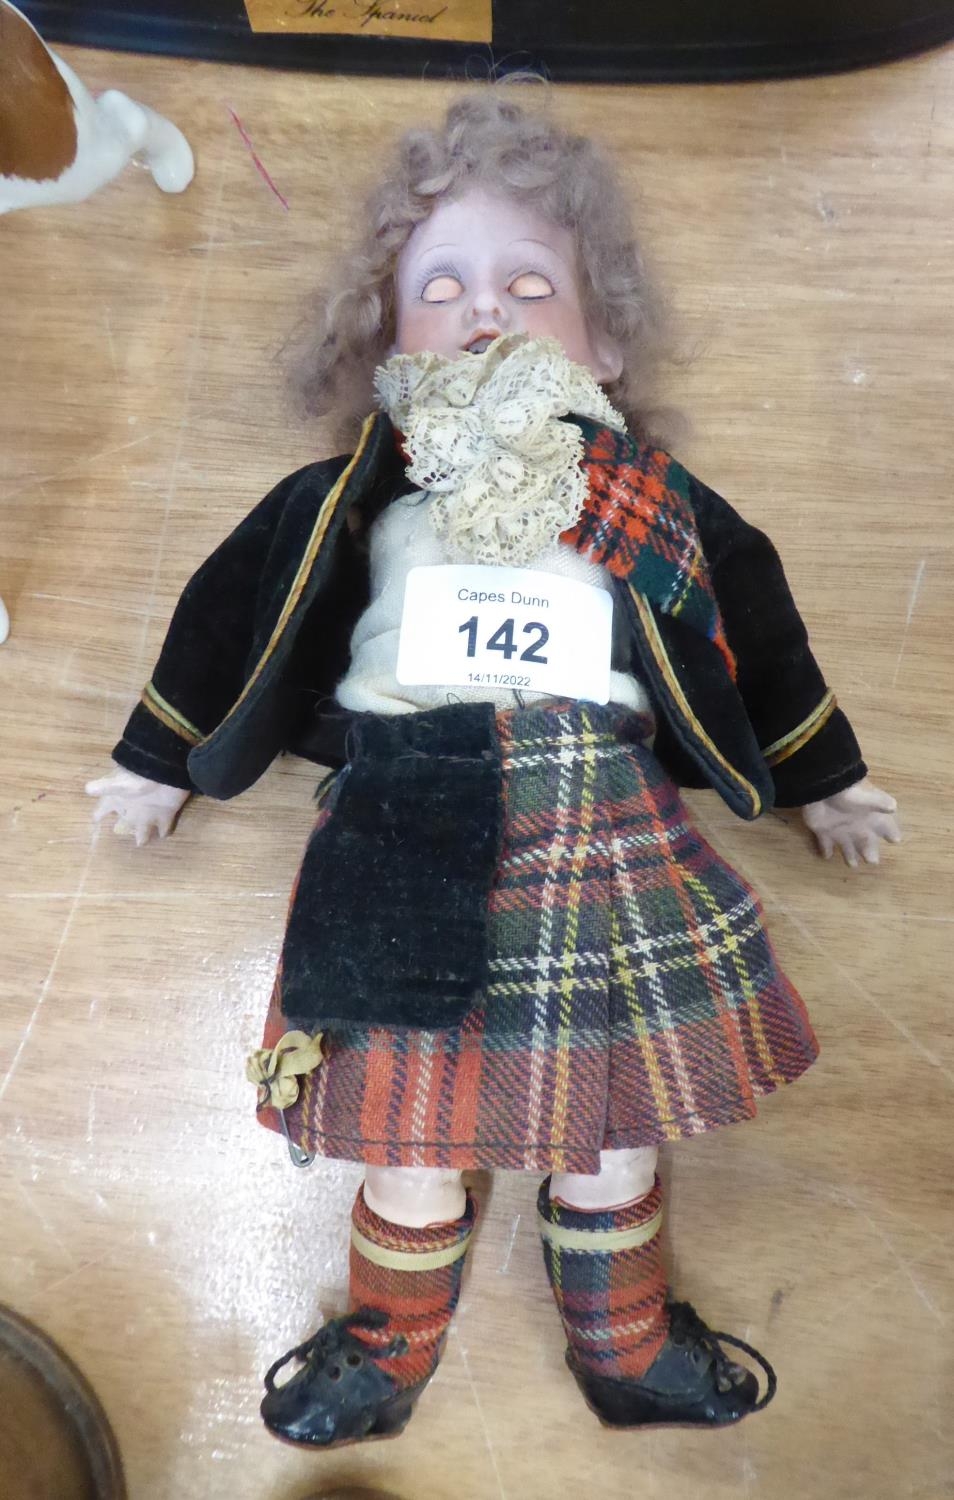 LATE NINETEENTH CENTURY ARMAND MARSEILLE SMALL DOLL, DRESSED IN A KILT